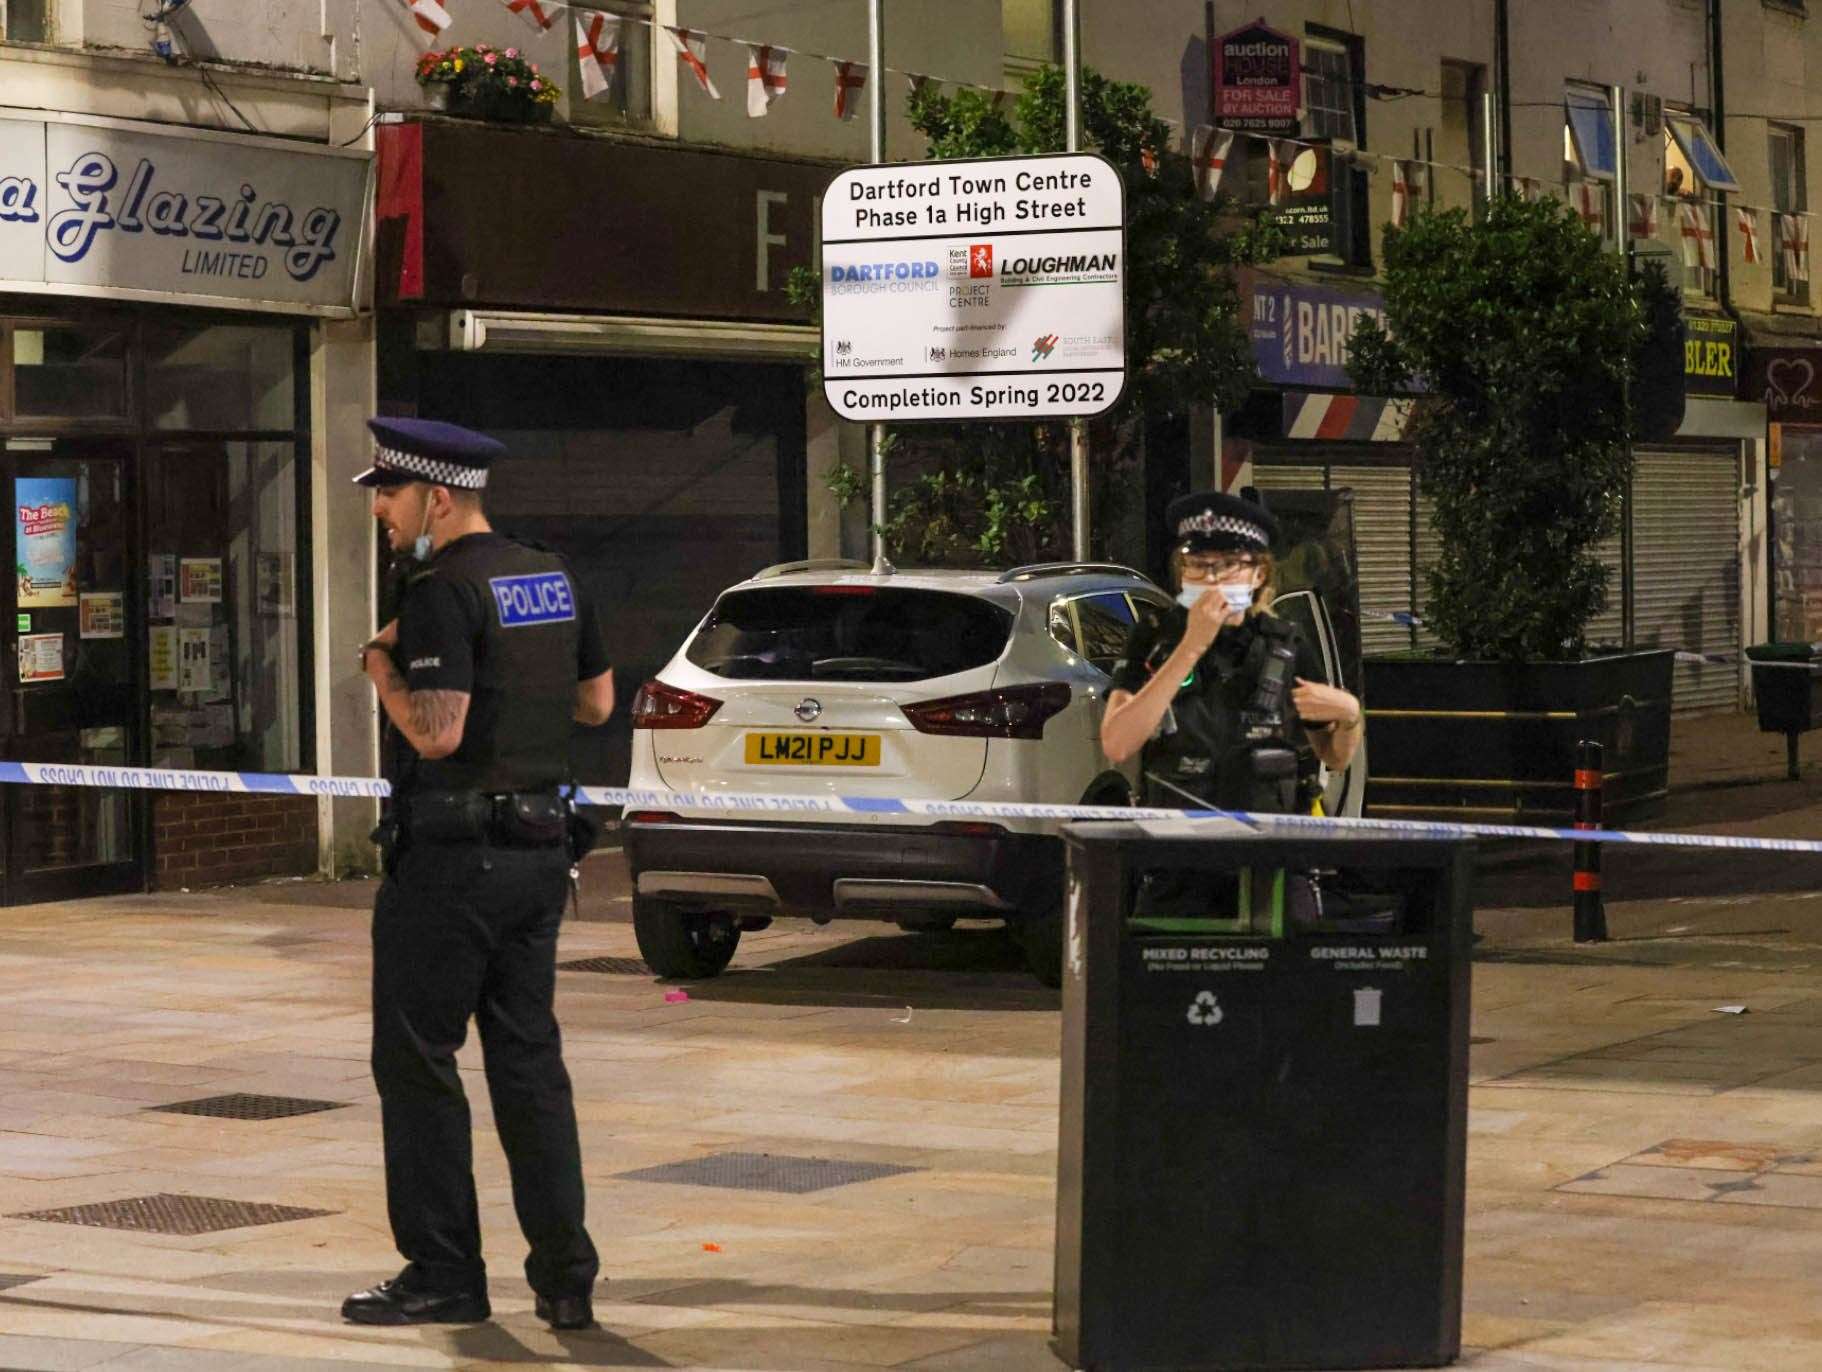 Police sealed off a part of Dartford town centre. Picture:UKNIP